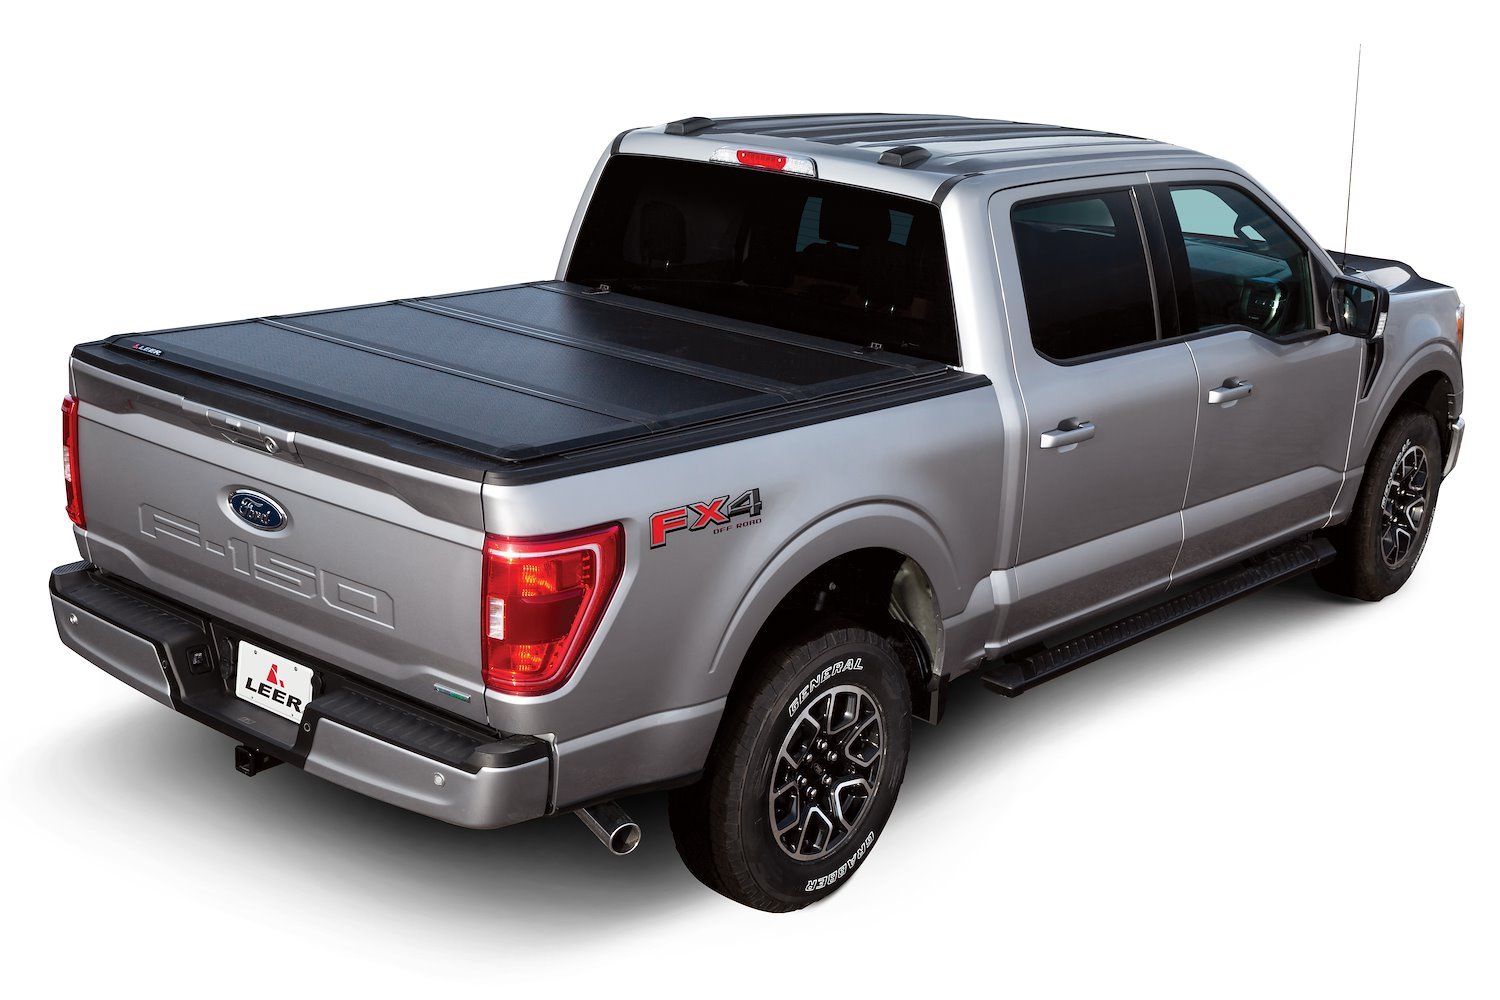 HF350M Hard Tri-Folding Tonneau Cover Fits Select Ram 1500, 2500, 3500 [Bed Length: 6 ft 4 in.]